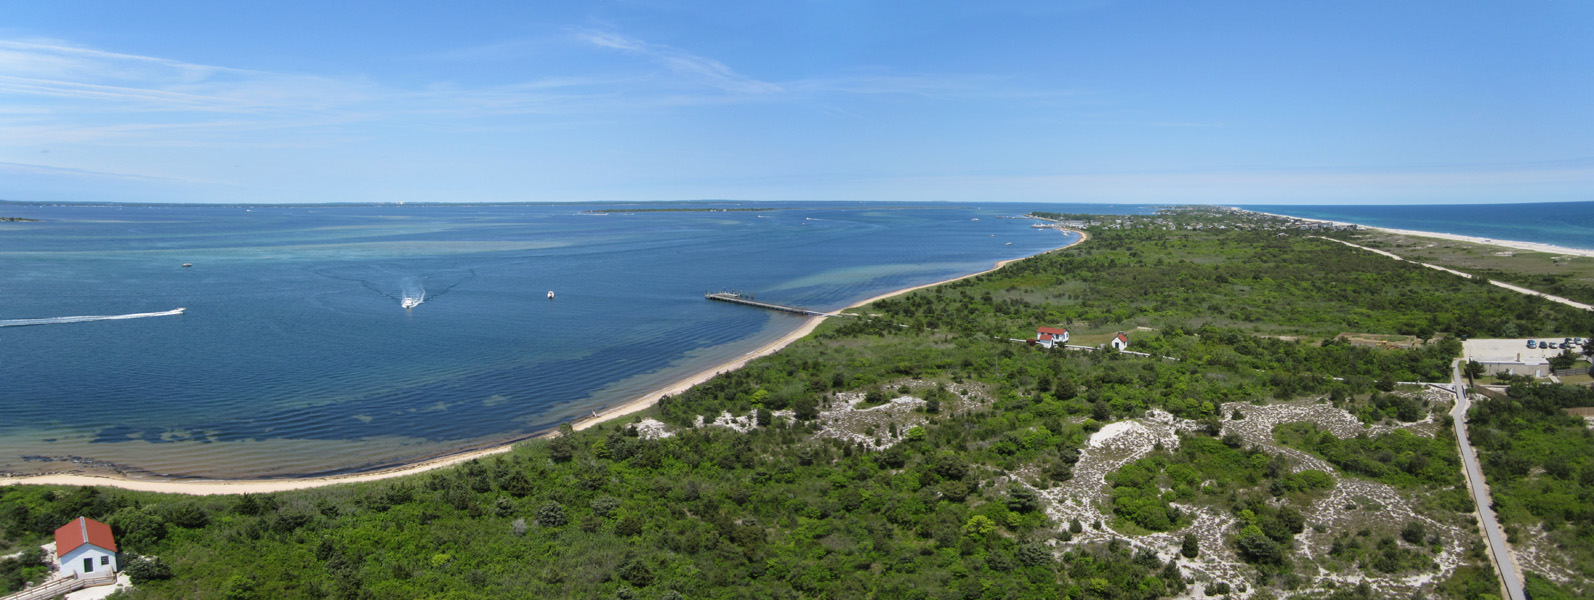 Panorama of Great South Bay and Eastern Fire Island